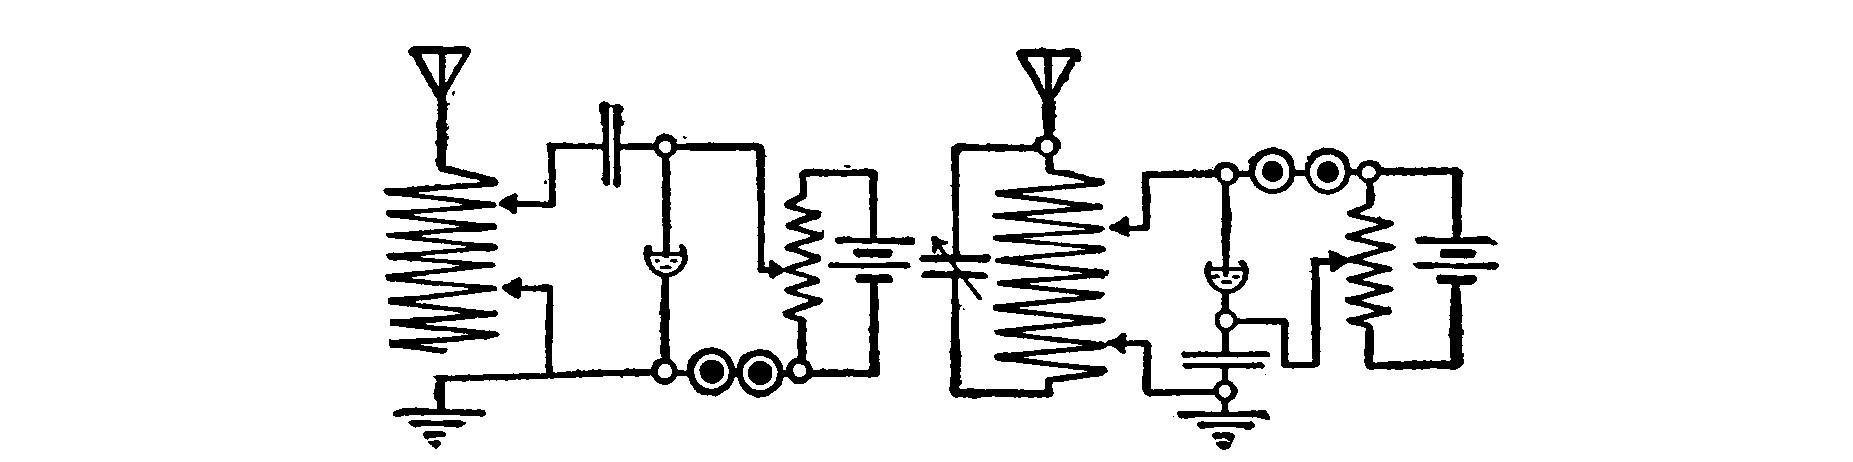 Fig. 123. Double-slide Tuning Coil Circuits.